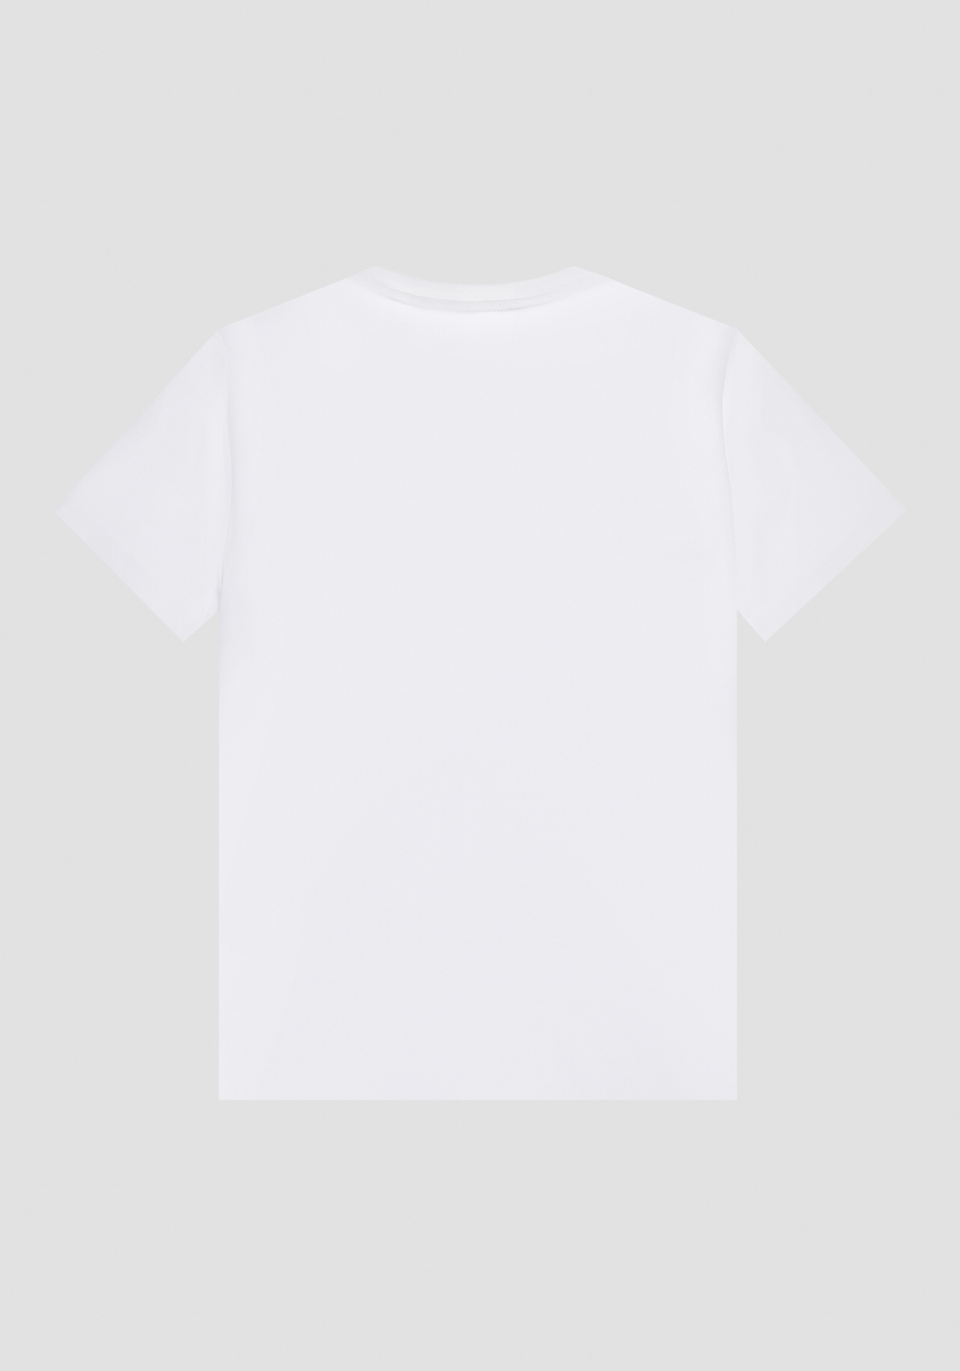 SUPER SLIM FIT T-SHIRT IN ELASTIC COTTON WITH RUBBER PRINTED LOGO - Antony Morato Online Shop